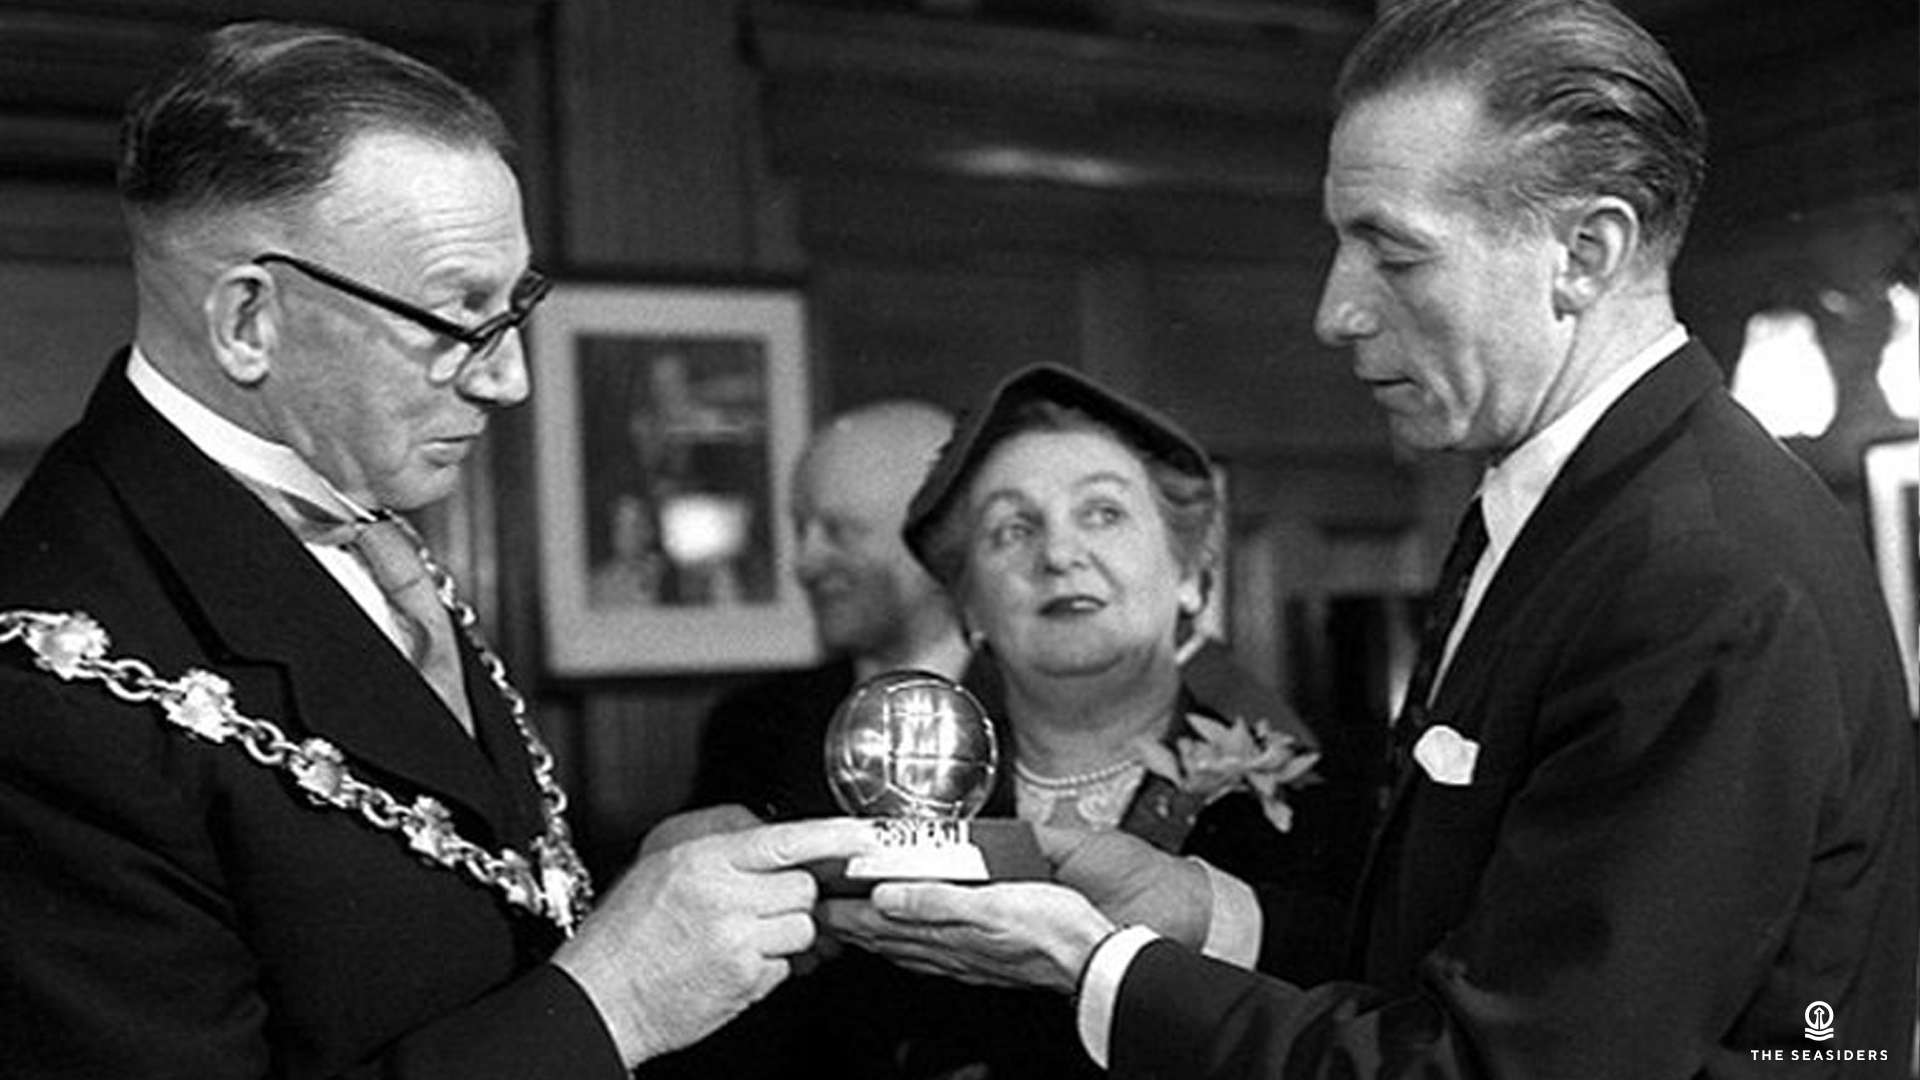 Blackpool FC on X: "🏆 On the subject of Ballon d'Or winners... 🥇 Here is Sir Stanley Matthews winning the first ever Ballon d'Or in 1956. 🍊 #UTMP https://t.co/WK32n3x1Ei" / X